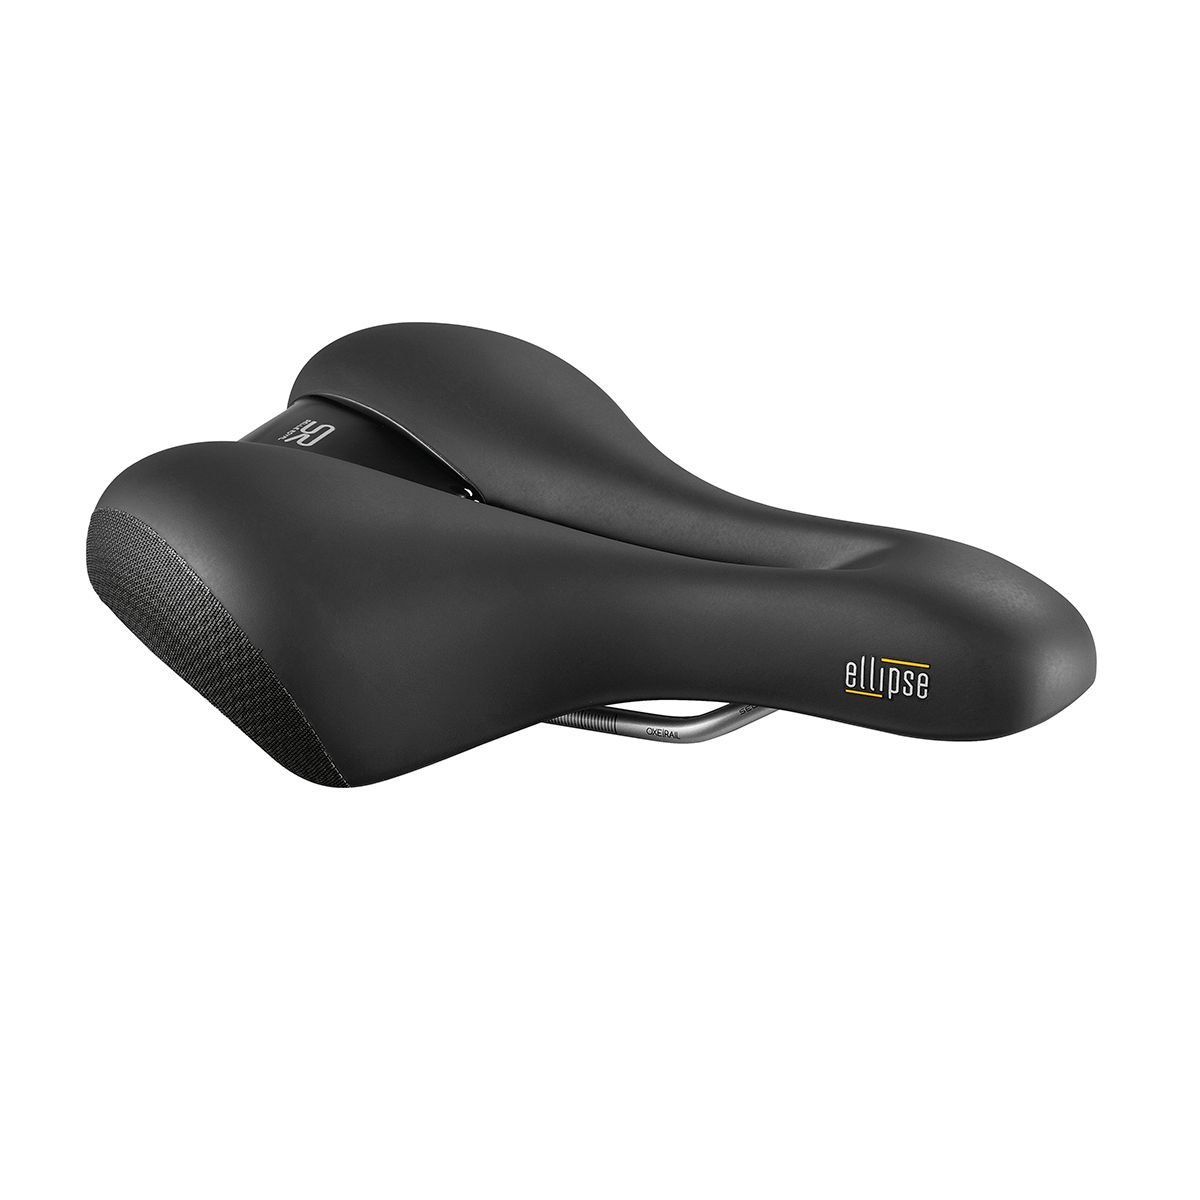 Седло Selle Royal Ellipse Moderate, женское, 51B6DE0A09321 седло selle royal freeway fit moderate муж 8v97hr0a08069